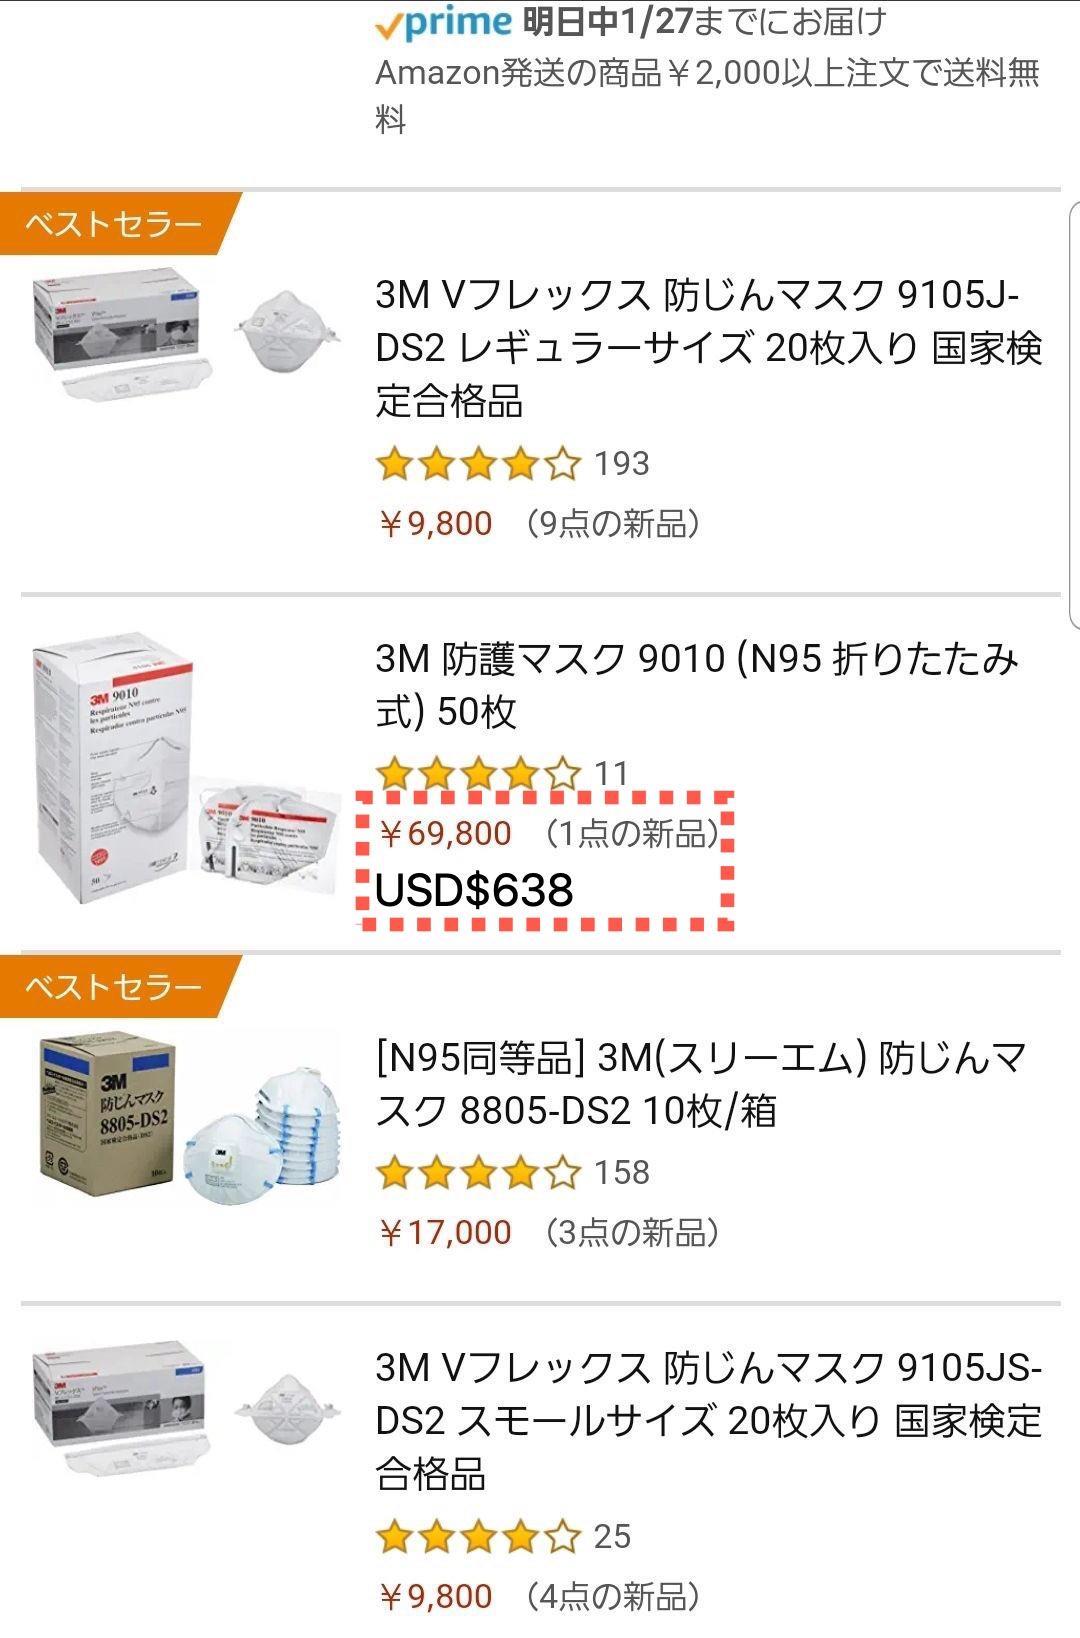 n95 mask sold by amazon